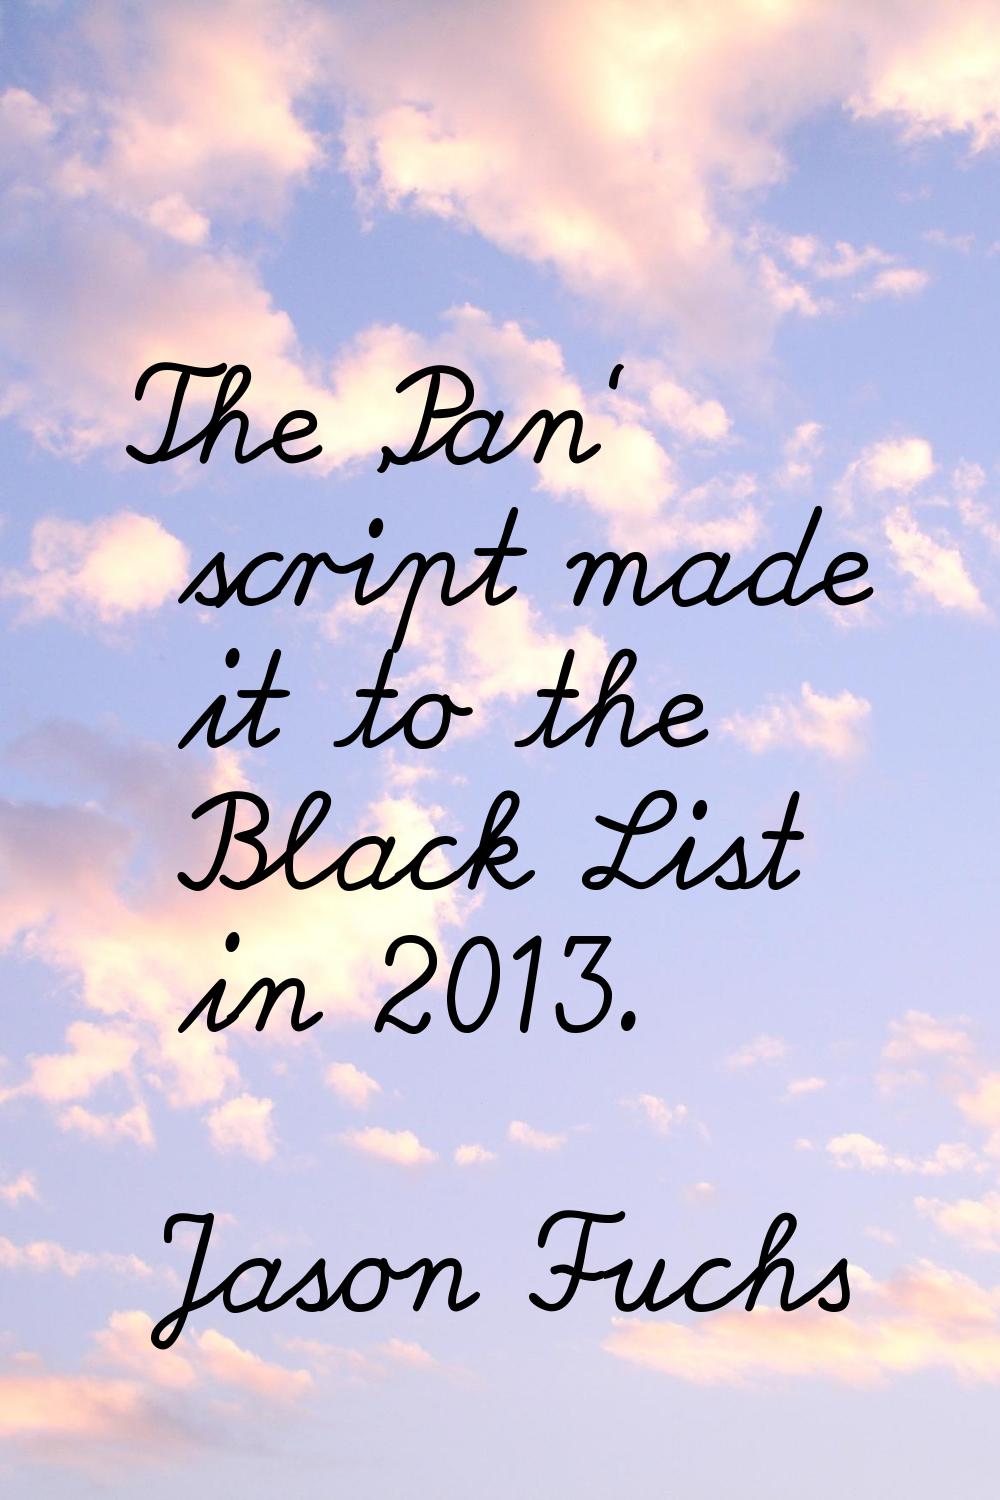 The 'Pan' script made it to the Black List in 2013.